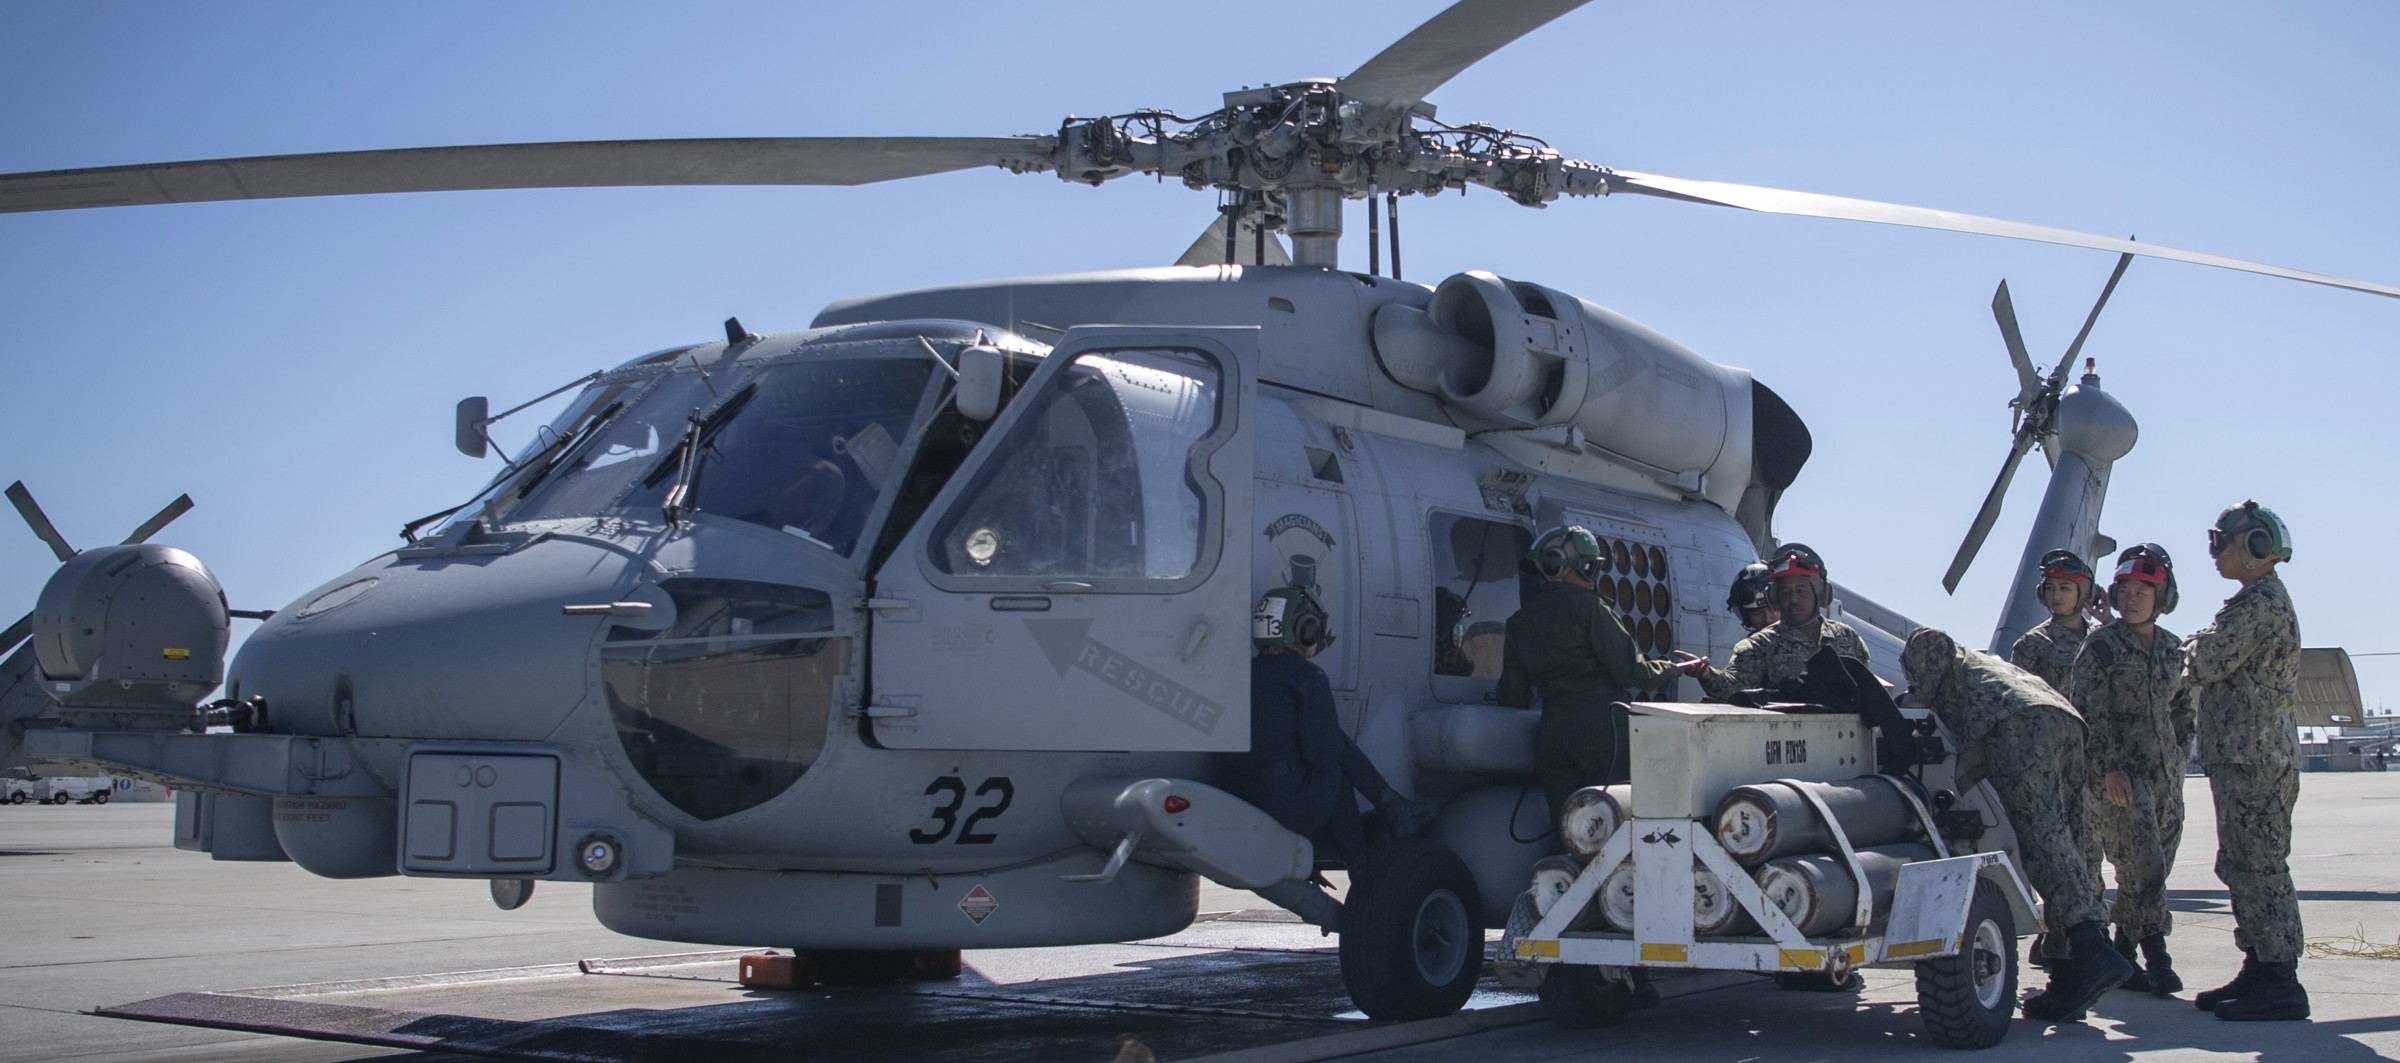 hsm-35 magicians helicopter maritime strike squadron us navy mh-60r seahawk nas north island california 47